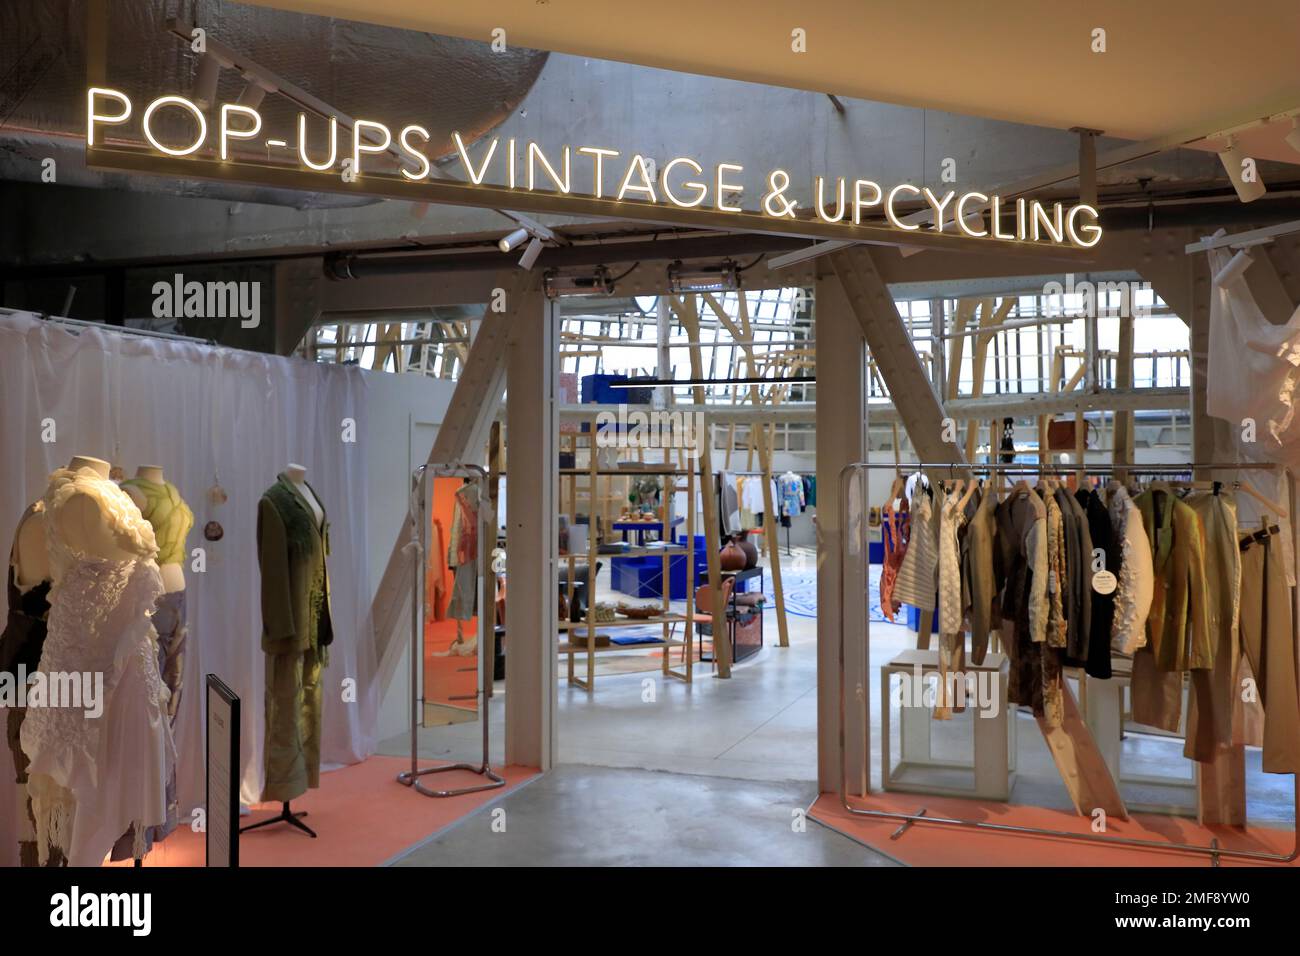 Pop-ups vintage & upcycling fashion store with sign in 7ieme Ciel (Seventh Heaven) on the 7th floor Au Printemps Haussmann department store.Paris.France Stock Photo